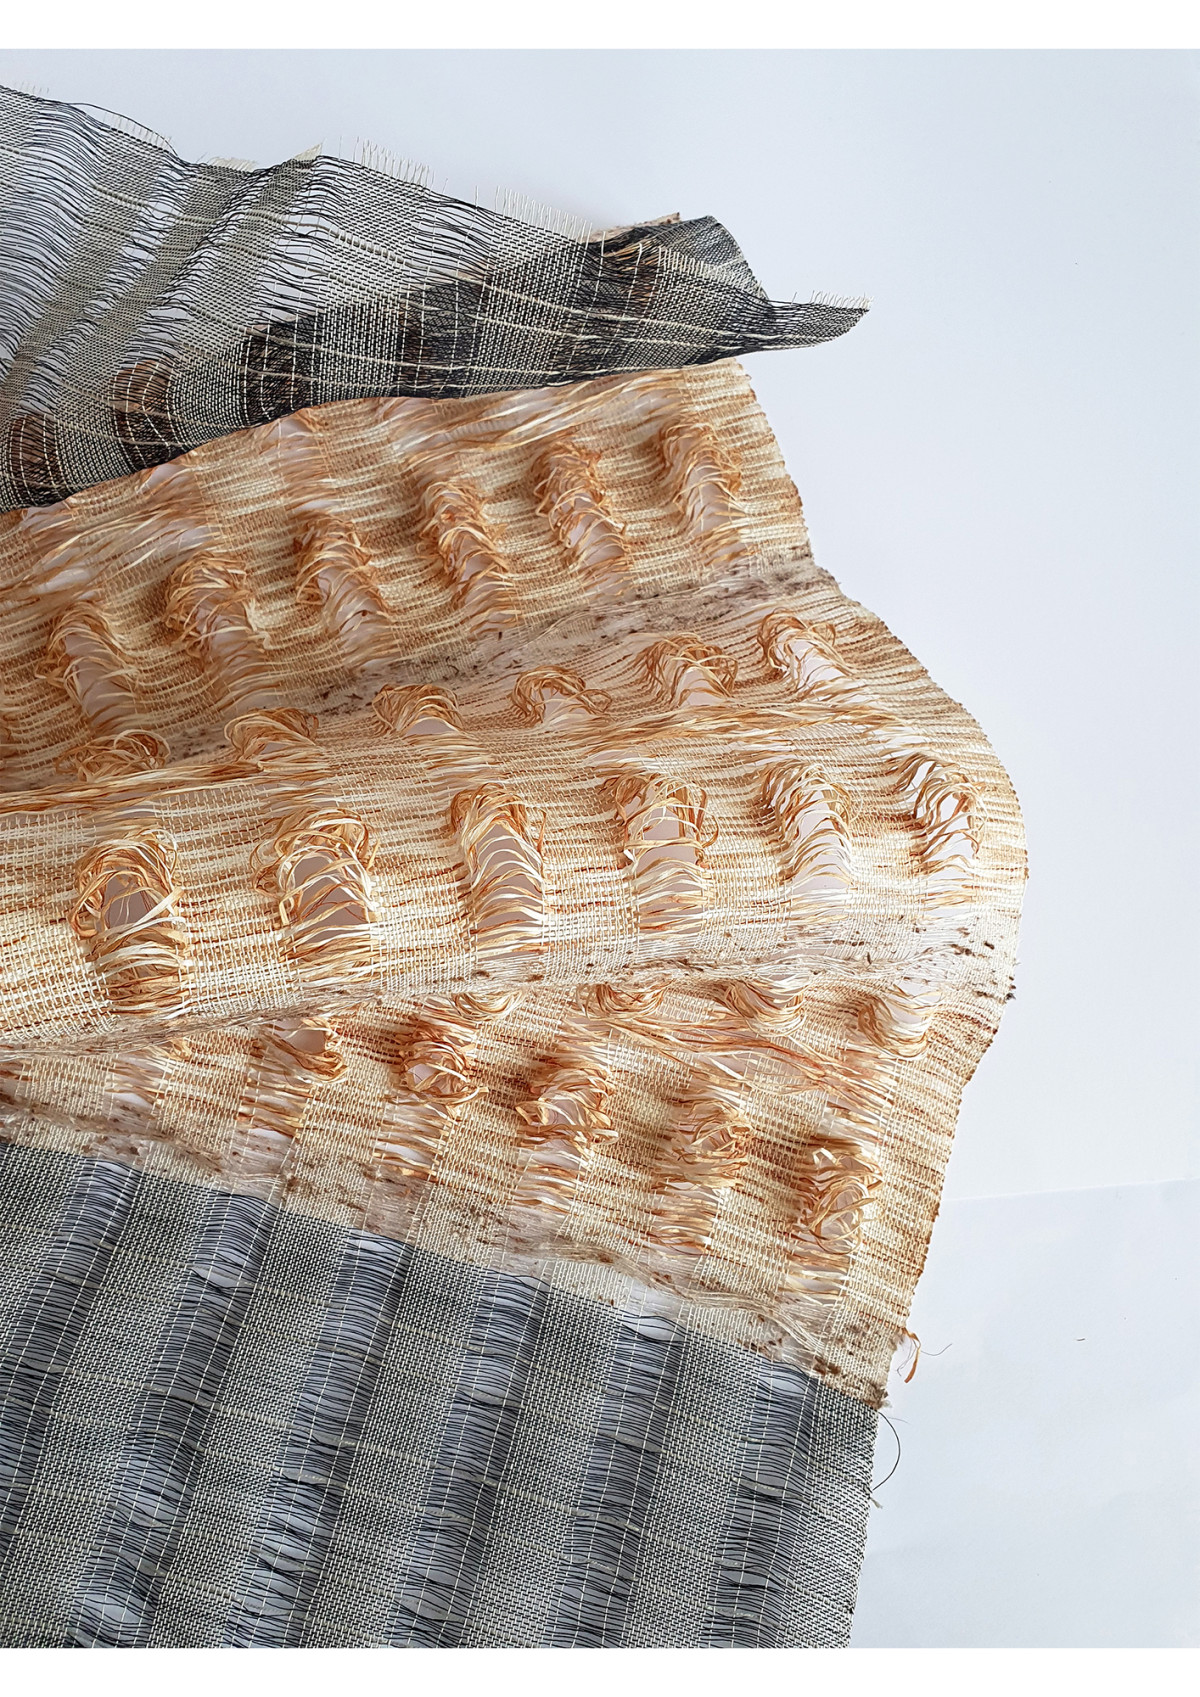 Paper weave with buckthorn dyed silk paper and fern silk, with ends of black fine paper and Egyptian cotton